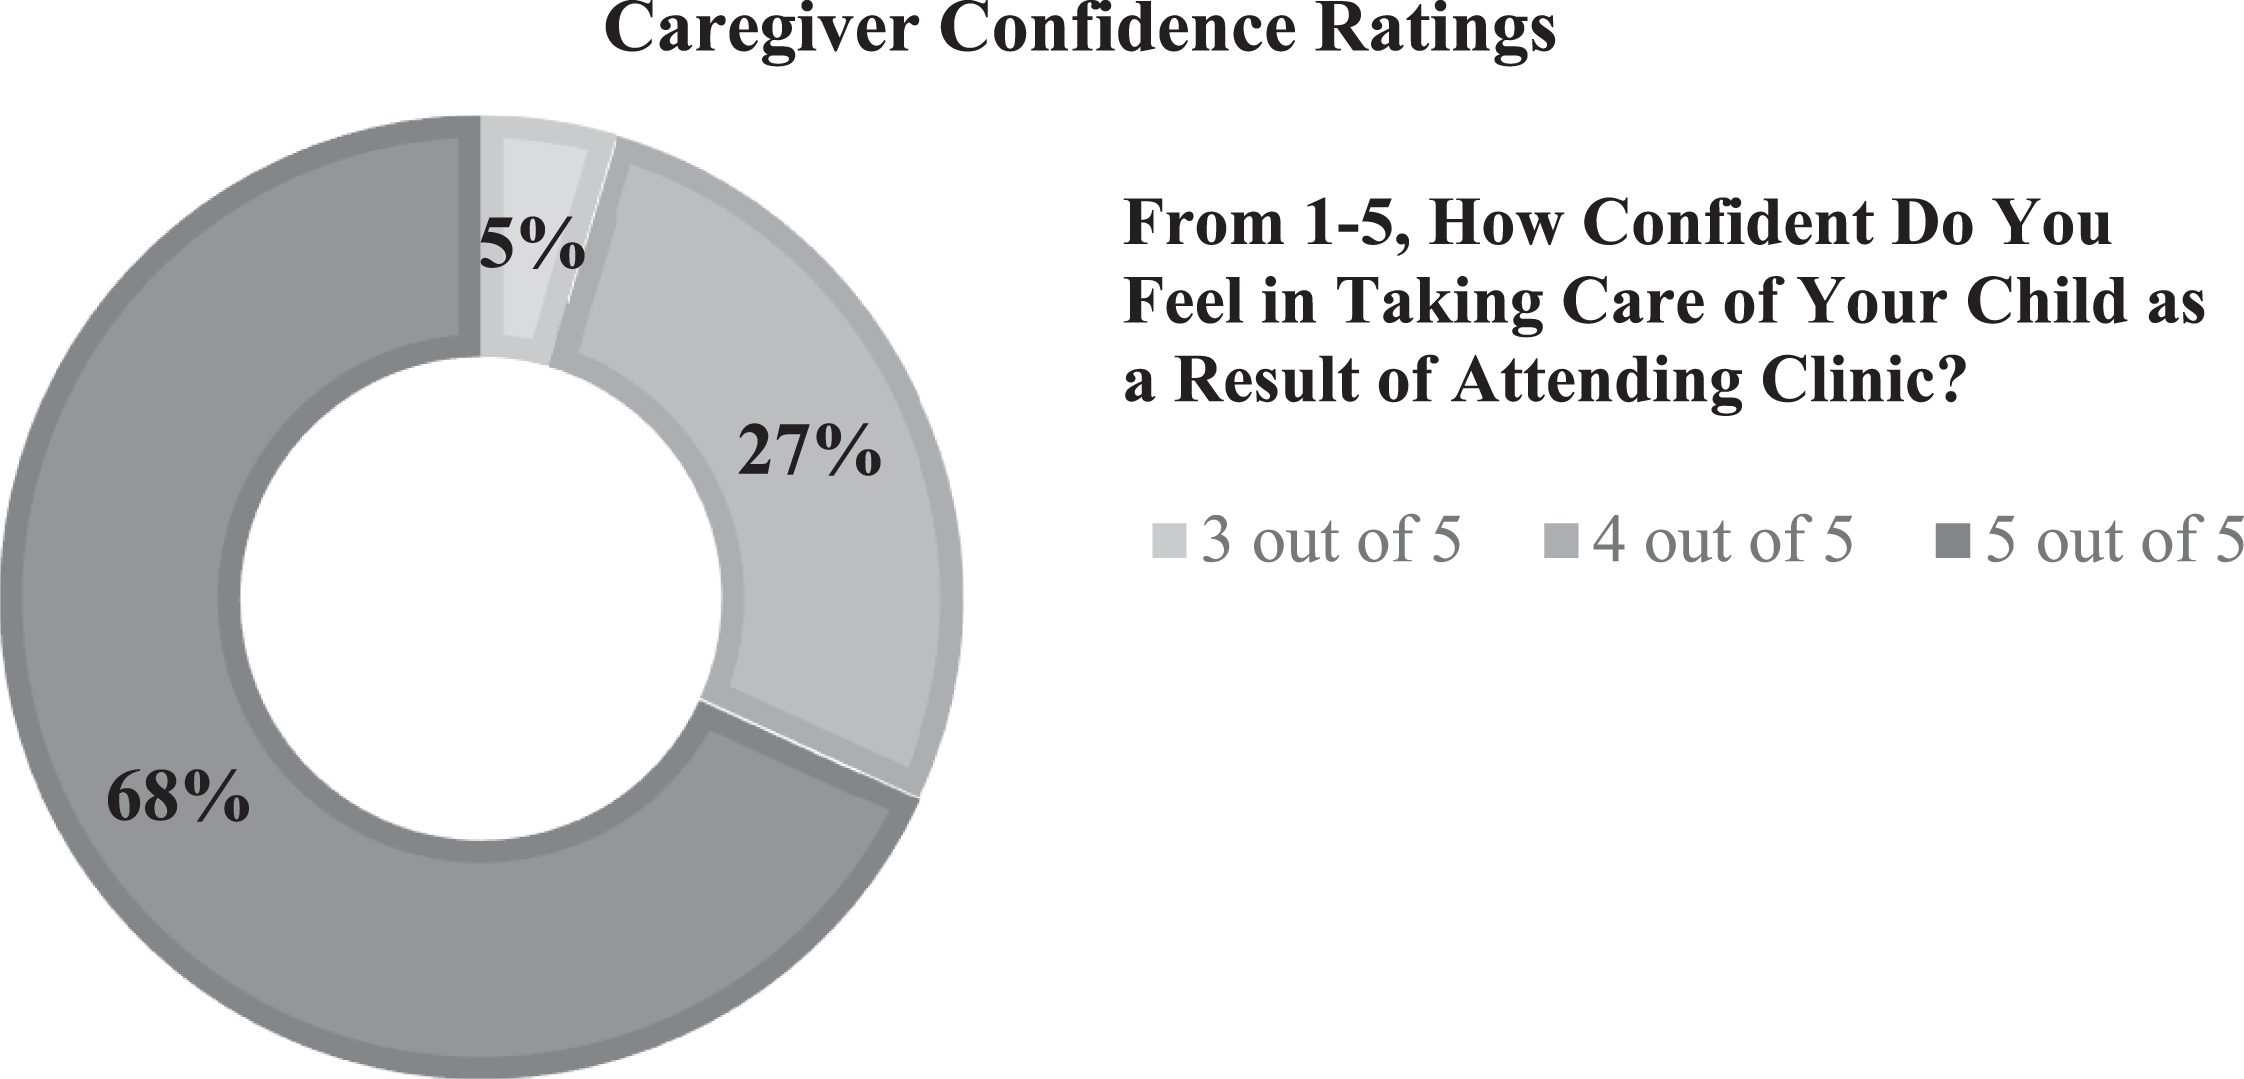 Caregiver Confidence Ratings. During interviews, caregivers were asked, “From 1–5, how confident do you feel in taking care of your child as a result of attending clinic?” In this Likert-type scale, 1 represented not at all confident and 5 represented the most. Responses ranged from 3 to 5, with a majority of caregivers noting their confidence was a 5.